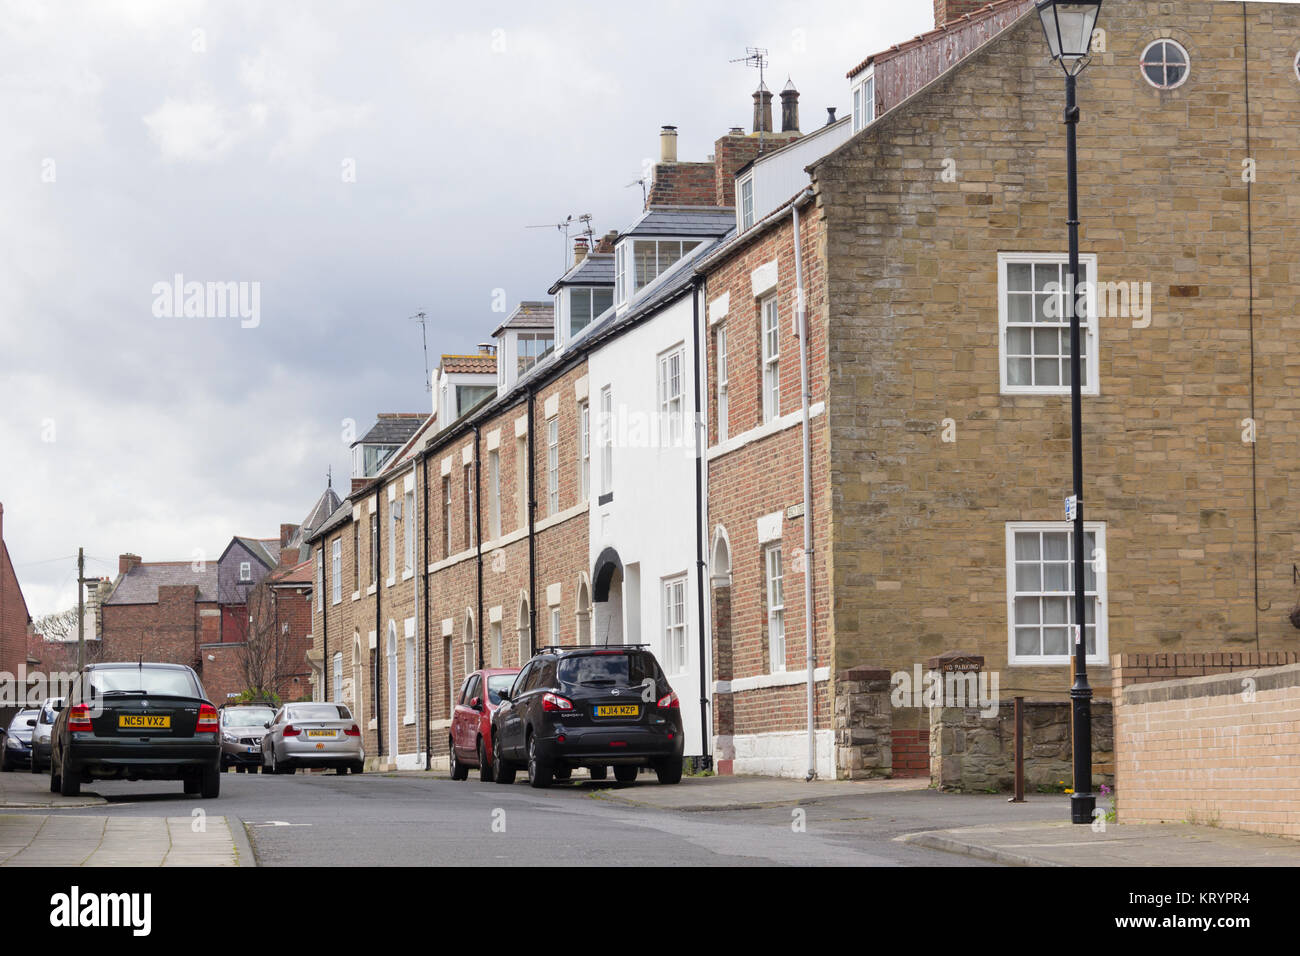 Houses on Percy Street, Tynemouth, Tyne and Wear, historically part of the country of Northumberland. The terraced houses have no front garden. Stock Photo